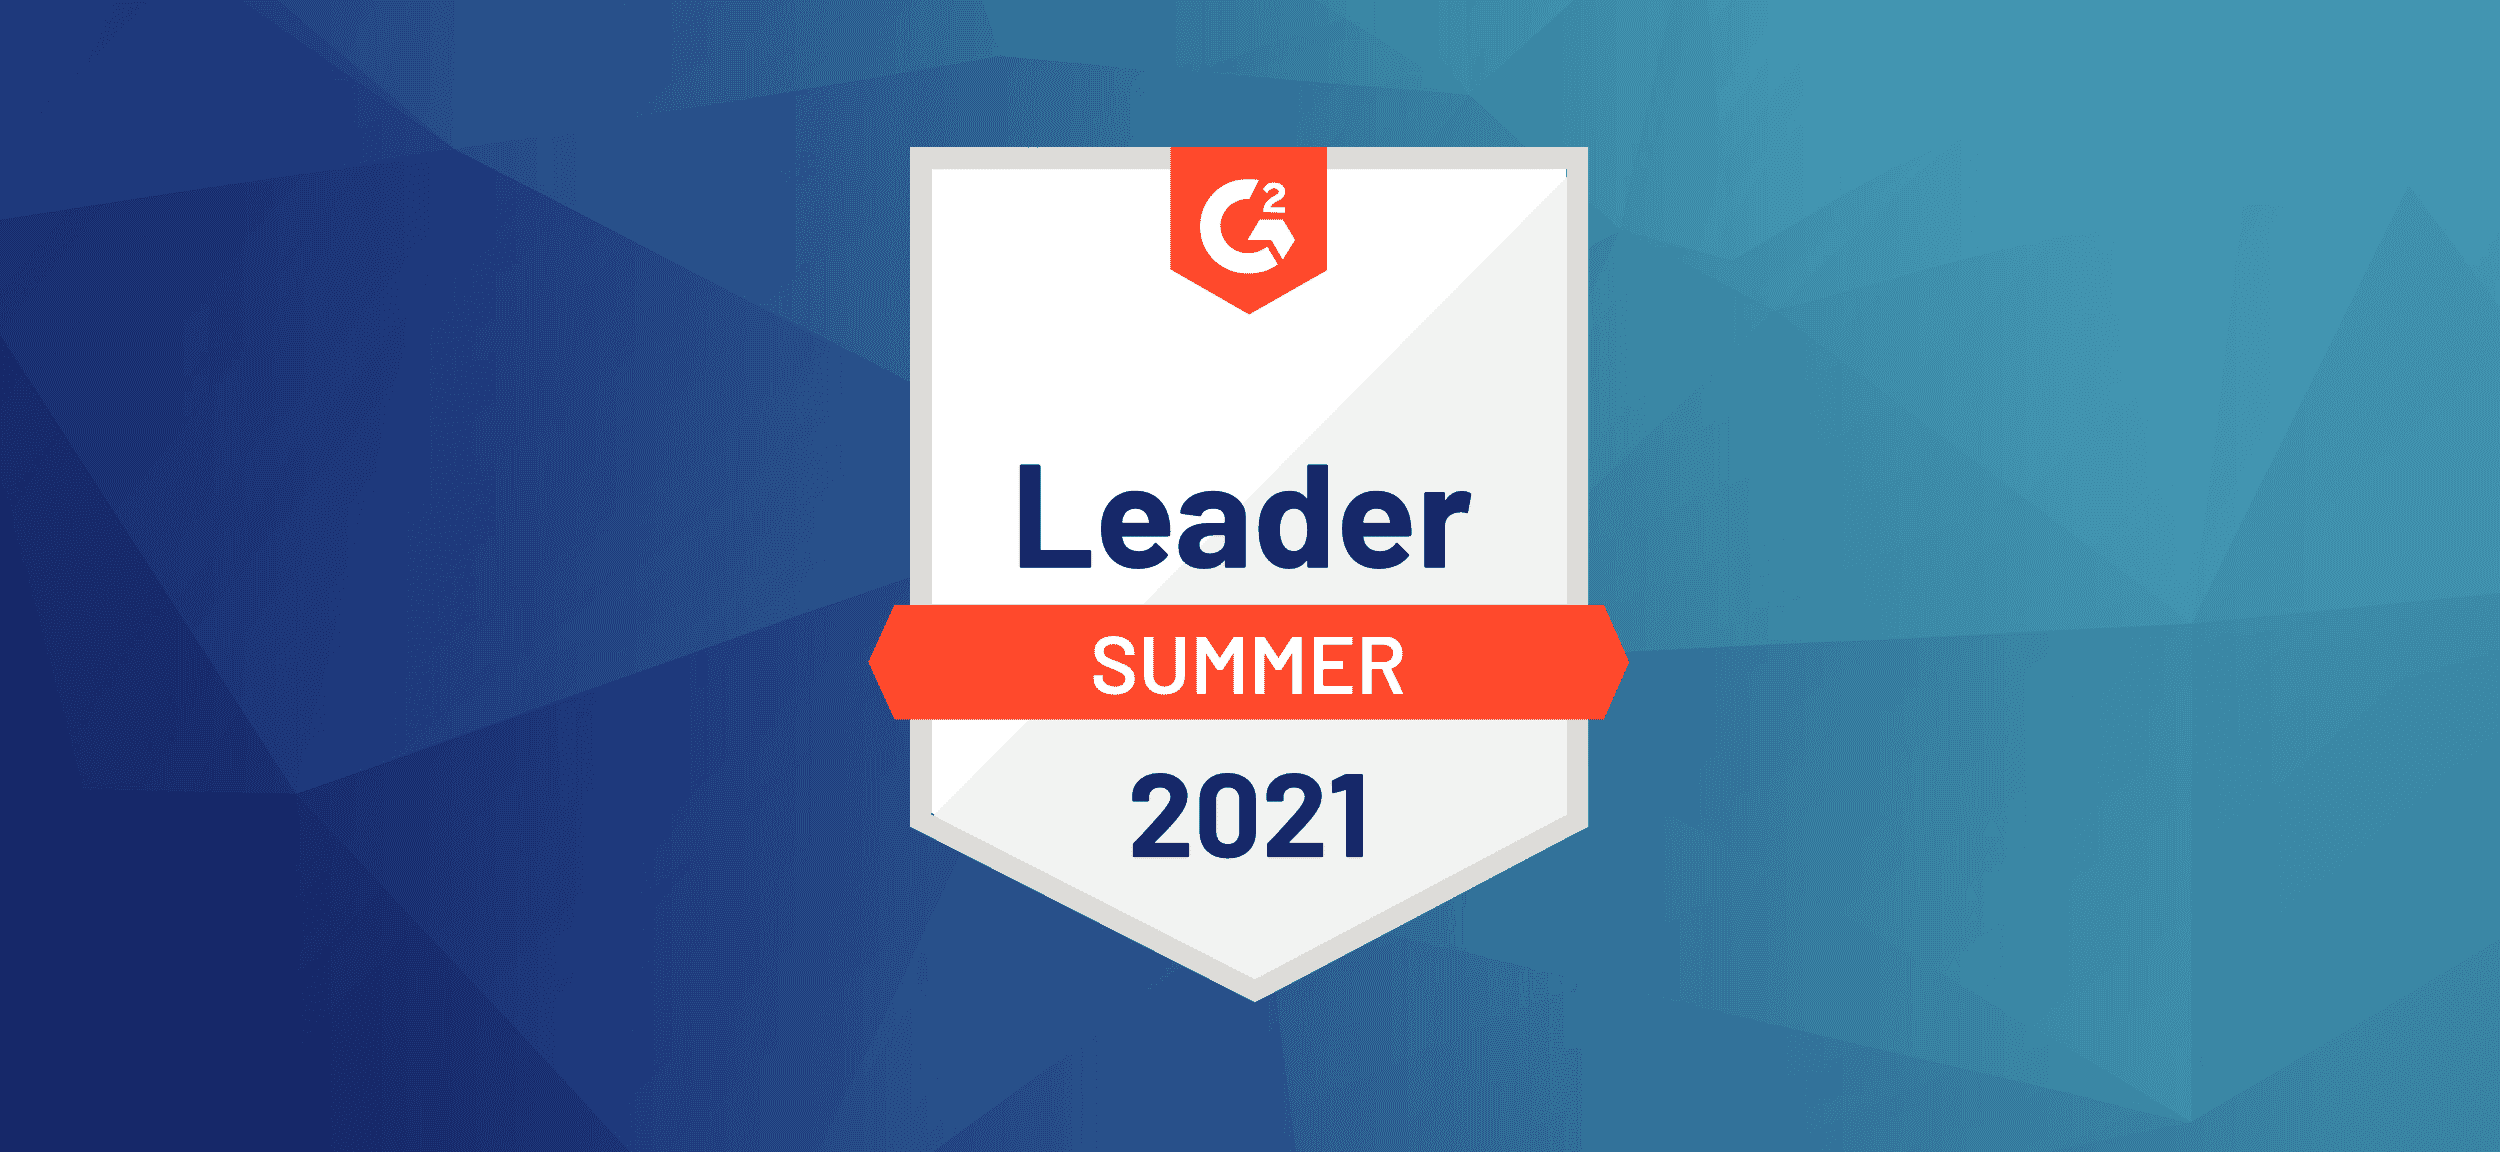 TUNE Named a Leader in G2's Summer 2021 Grid Reports